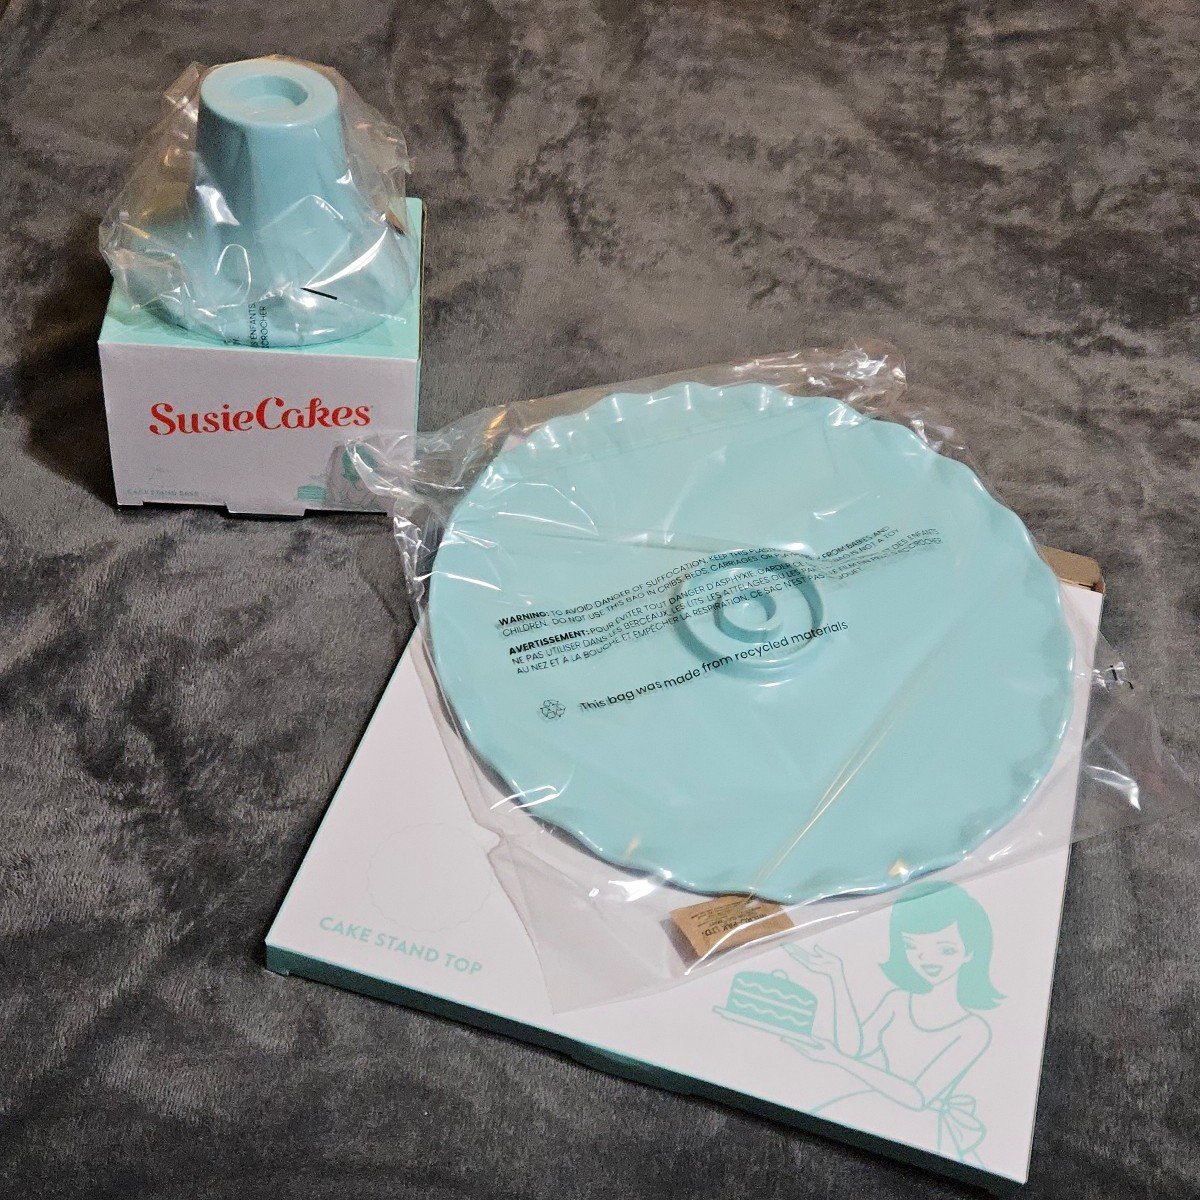 Susie Cakes Cake Stand Base & Cake Stand Top (in a pastel teal color) bjxSRzZ5I